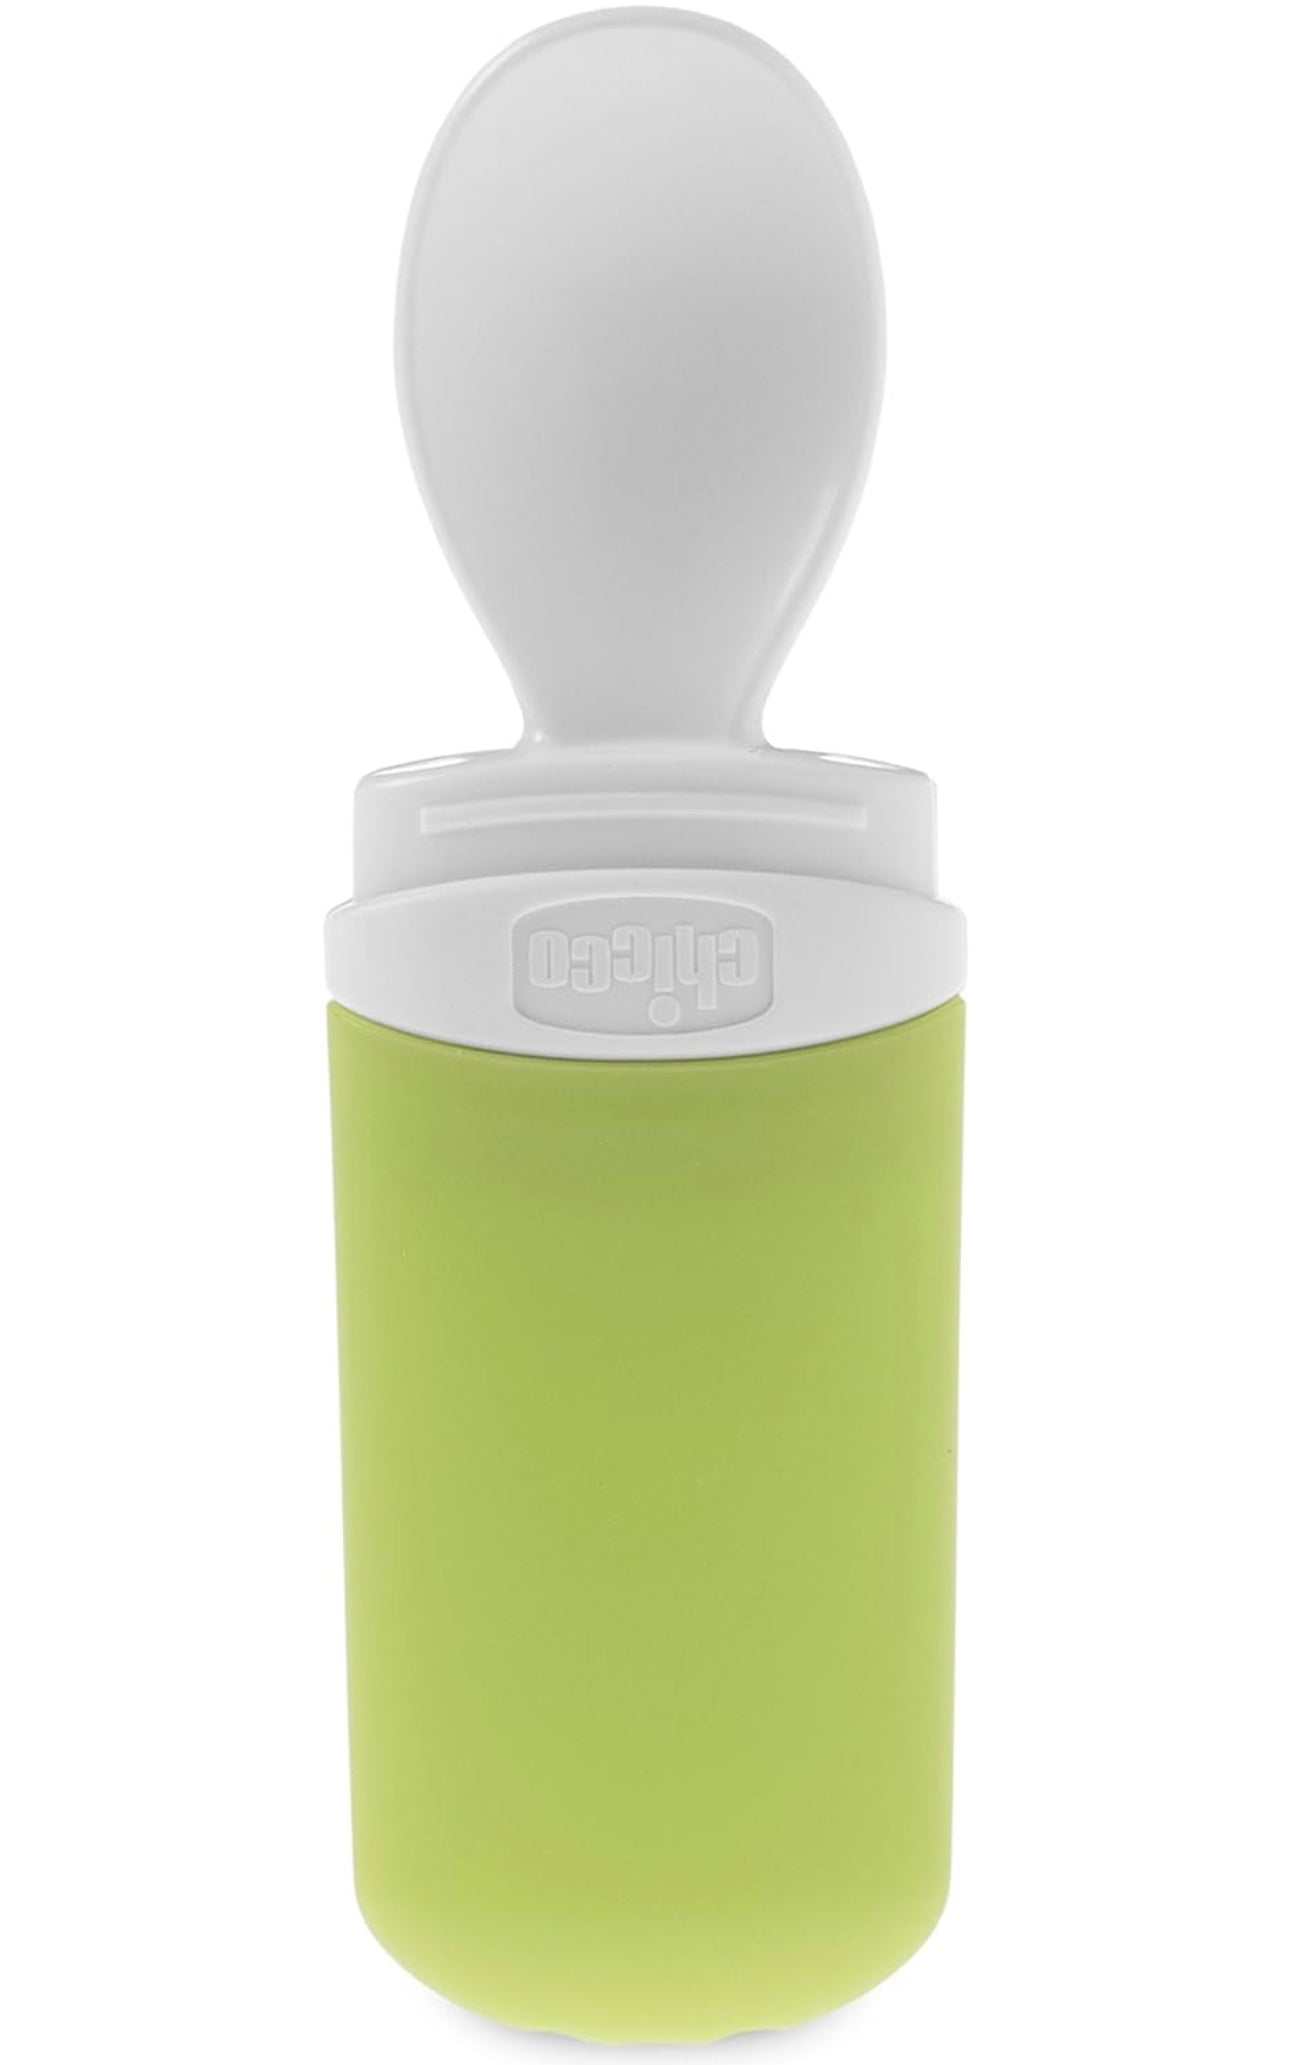 Chicco insulated Baby Food Container System, 6m+